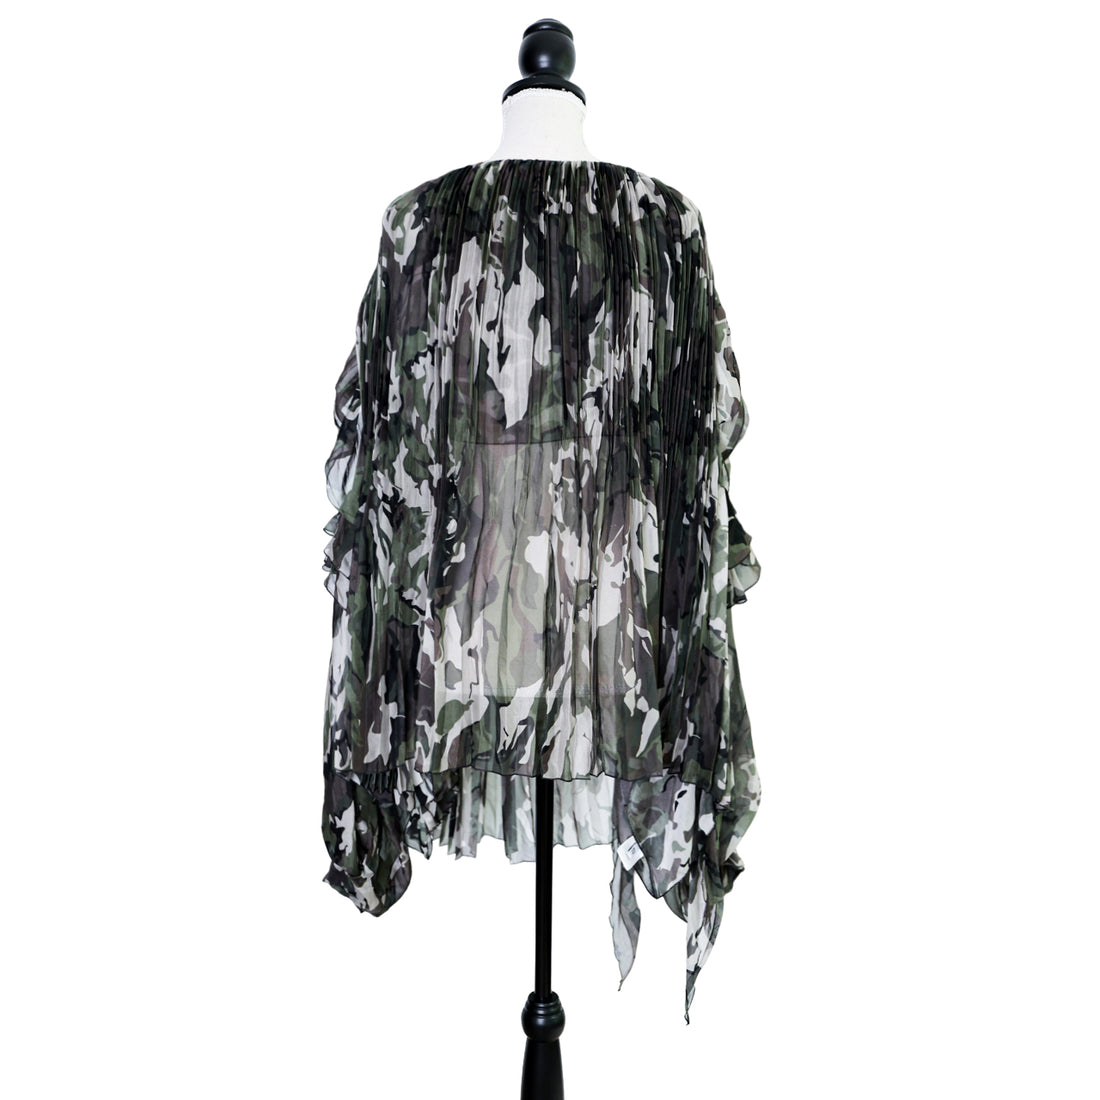 Alexandre Vauthier Semi-sheer camouflage style pleated top